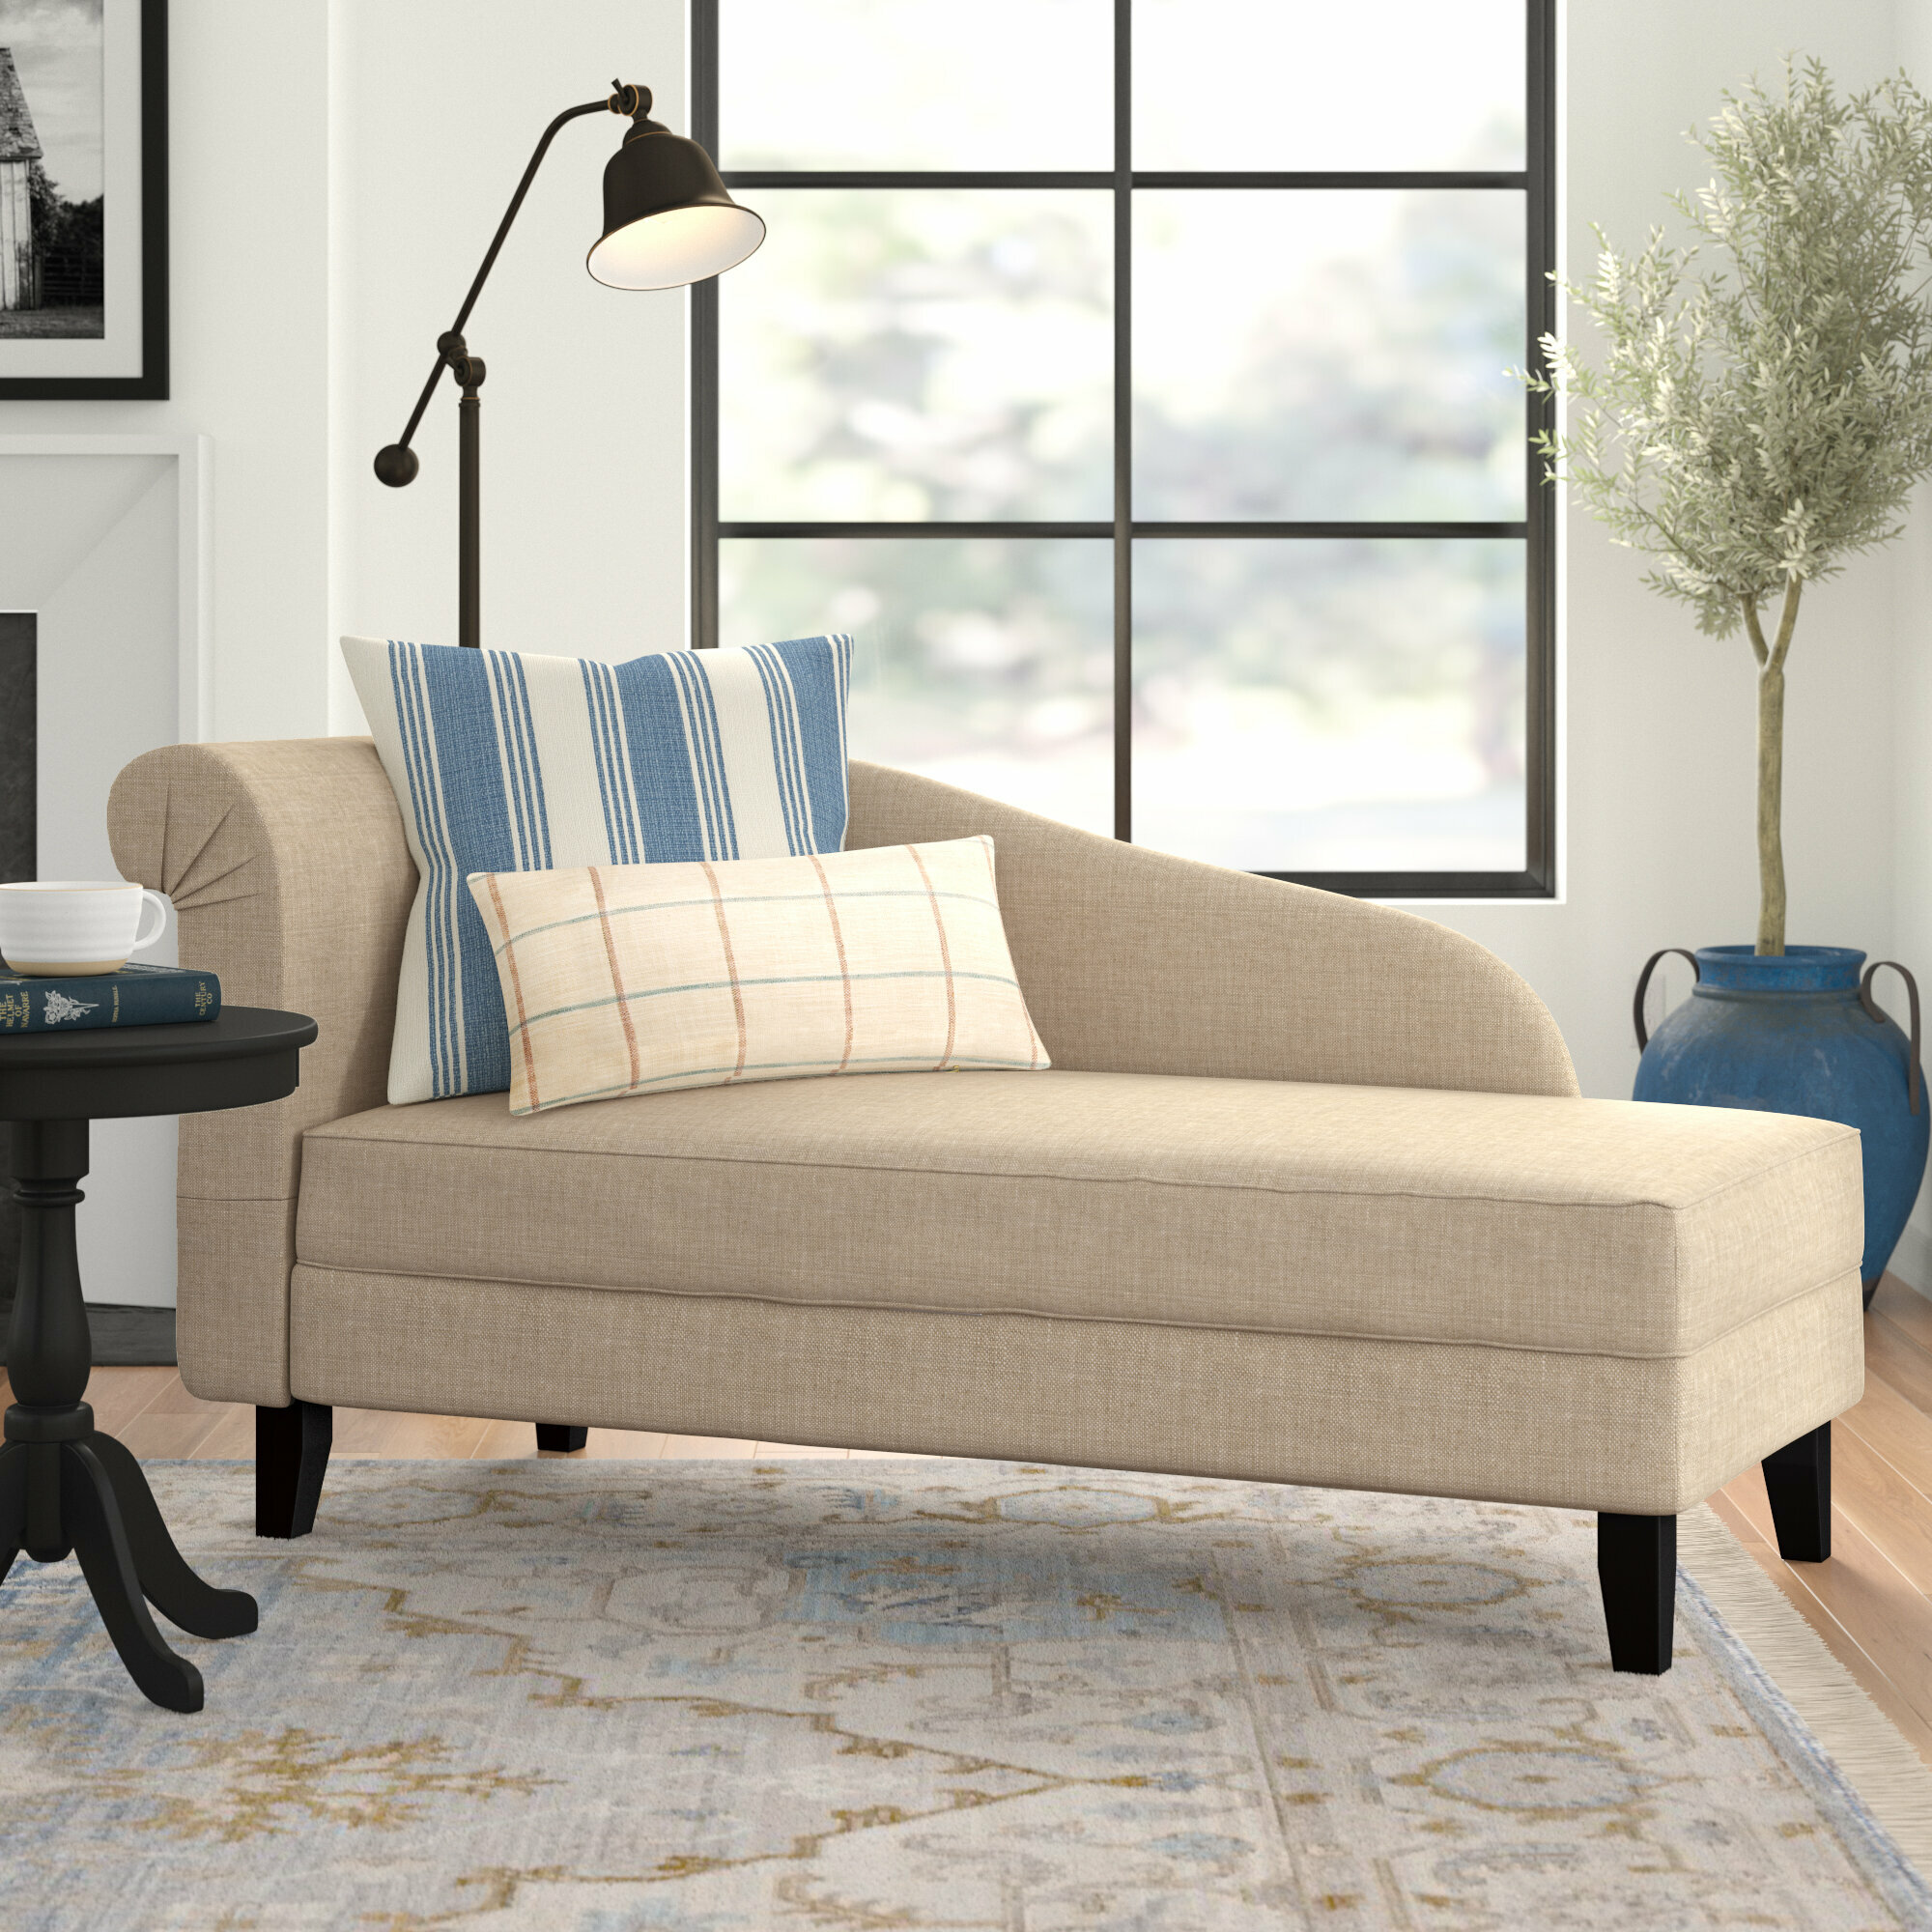 Middletown Upholstered Chaise Lounge